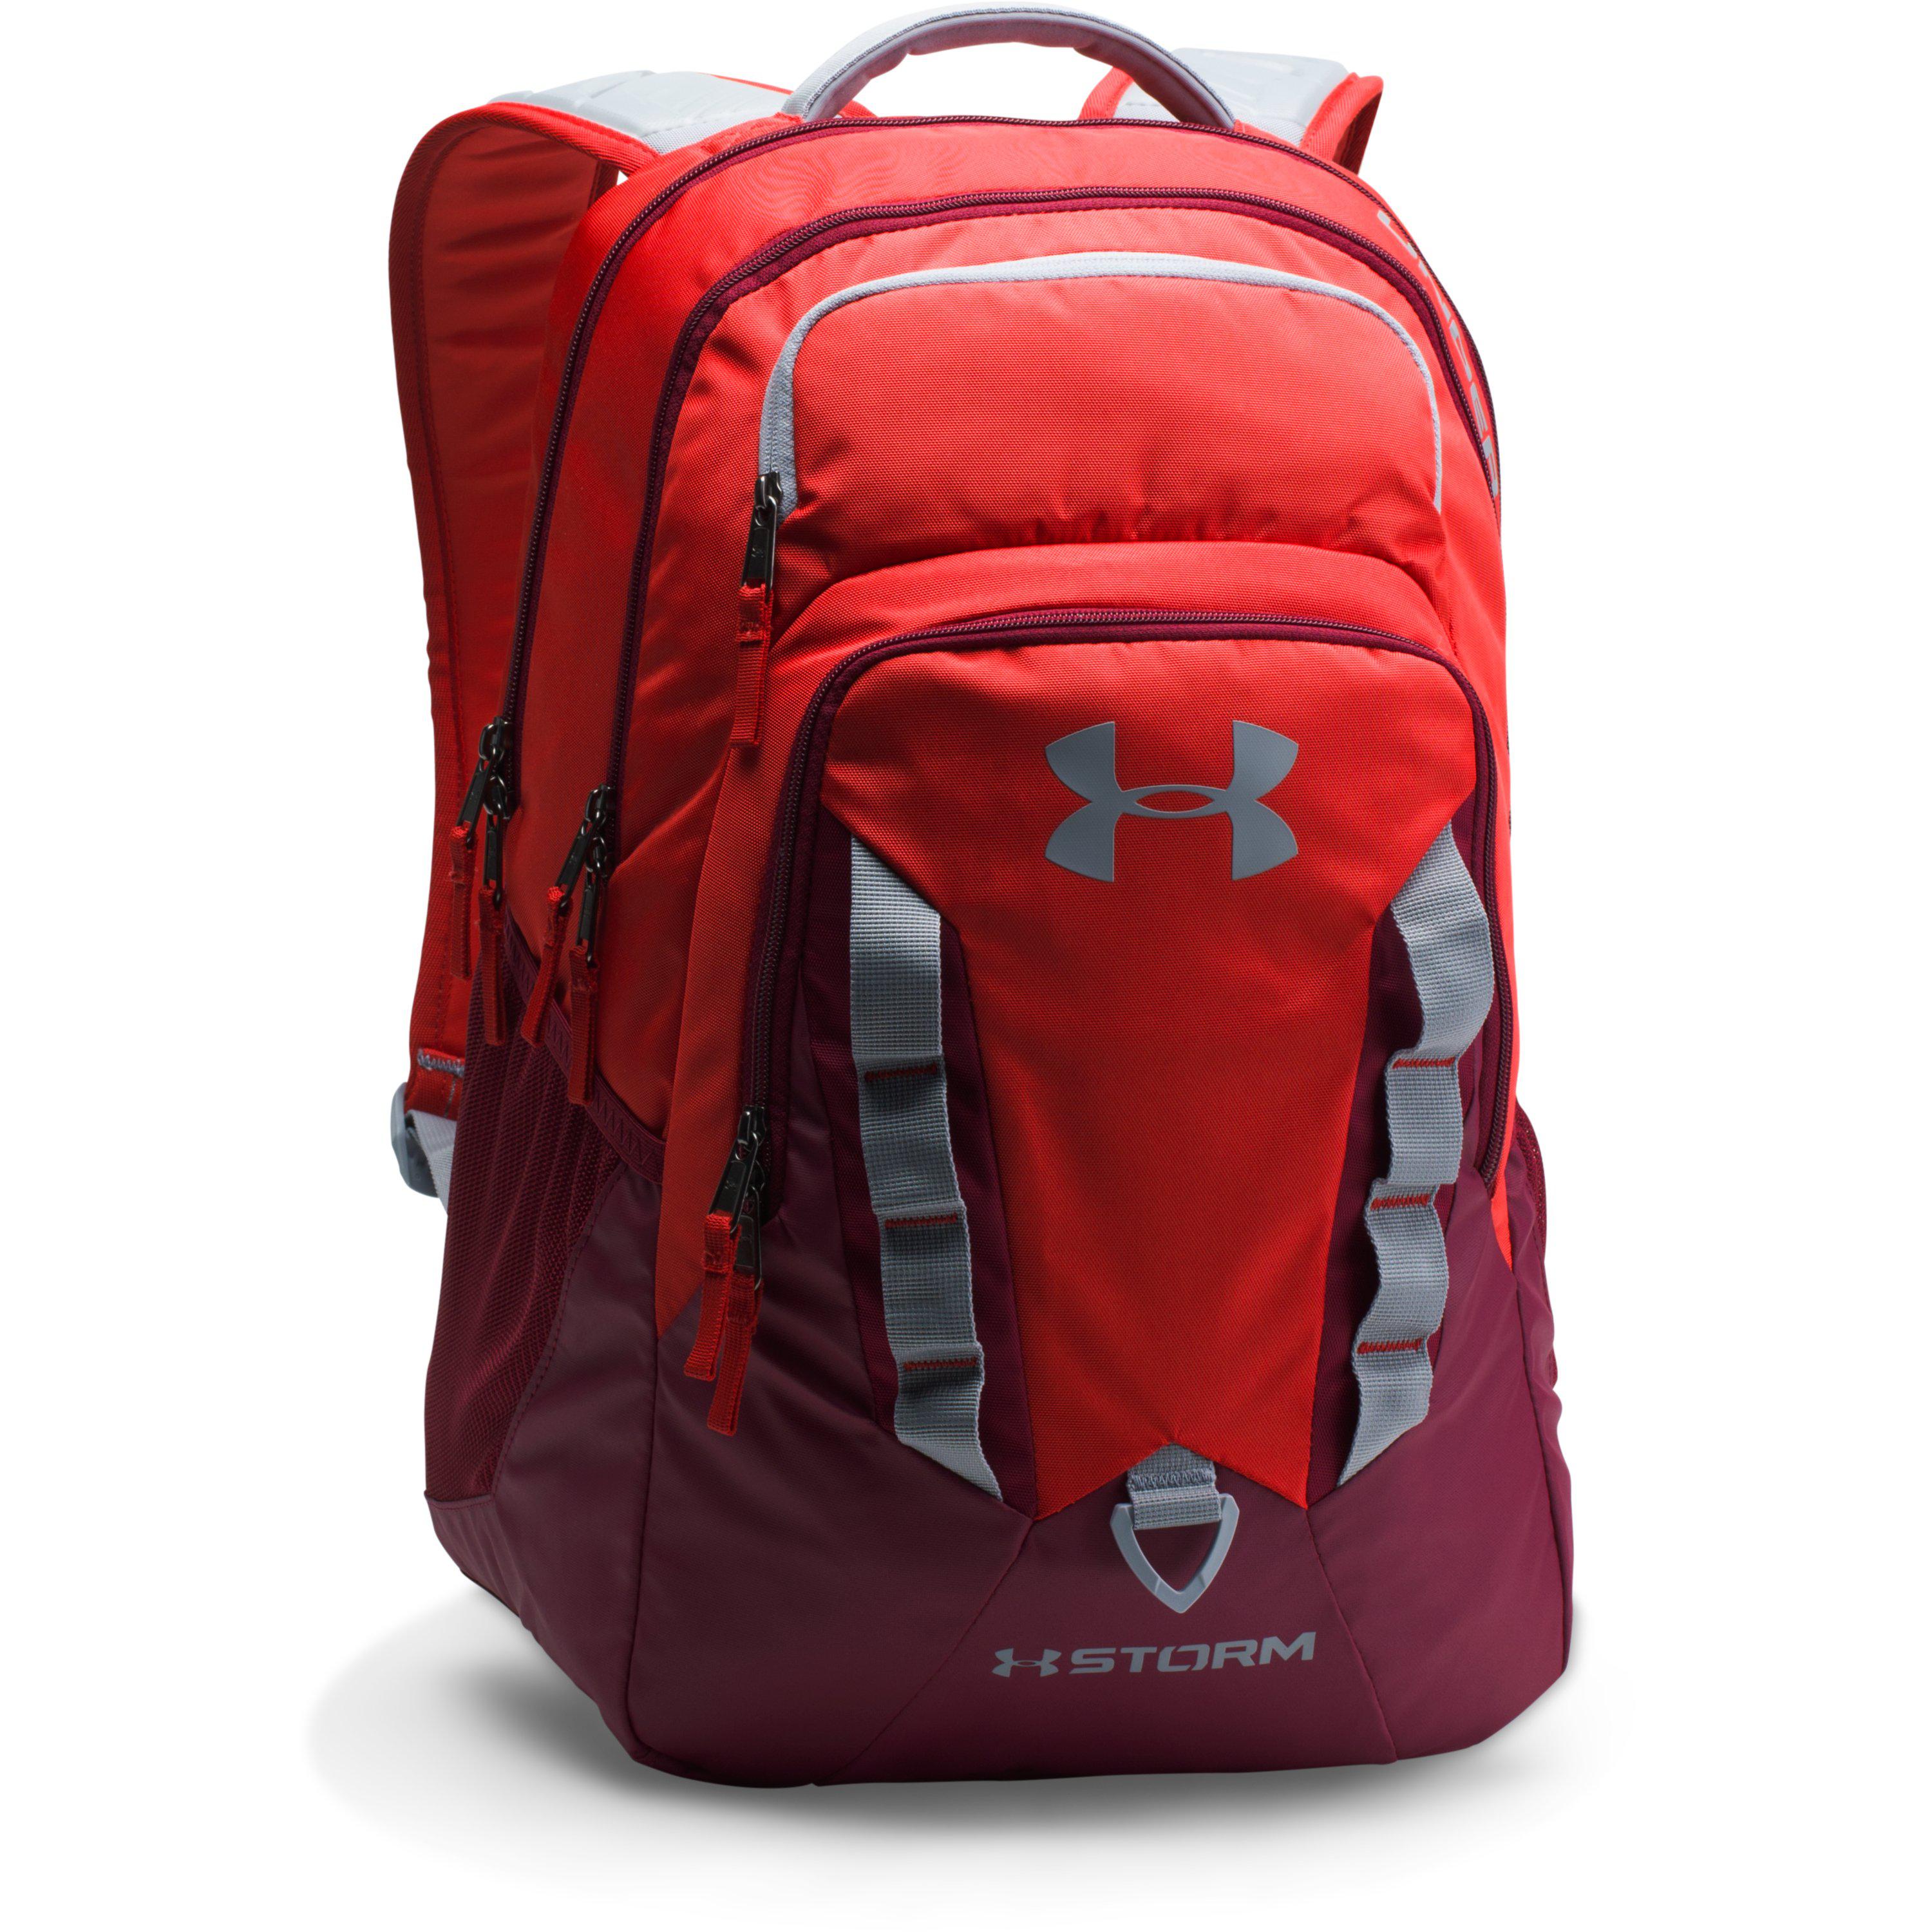 Under Armour Storm Recruit Large Backpack with Laptop Sleeve Red/Black Currant 